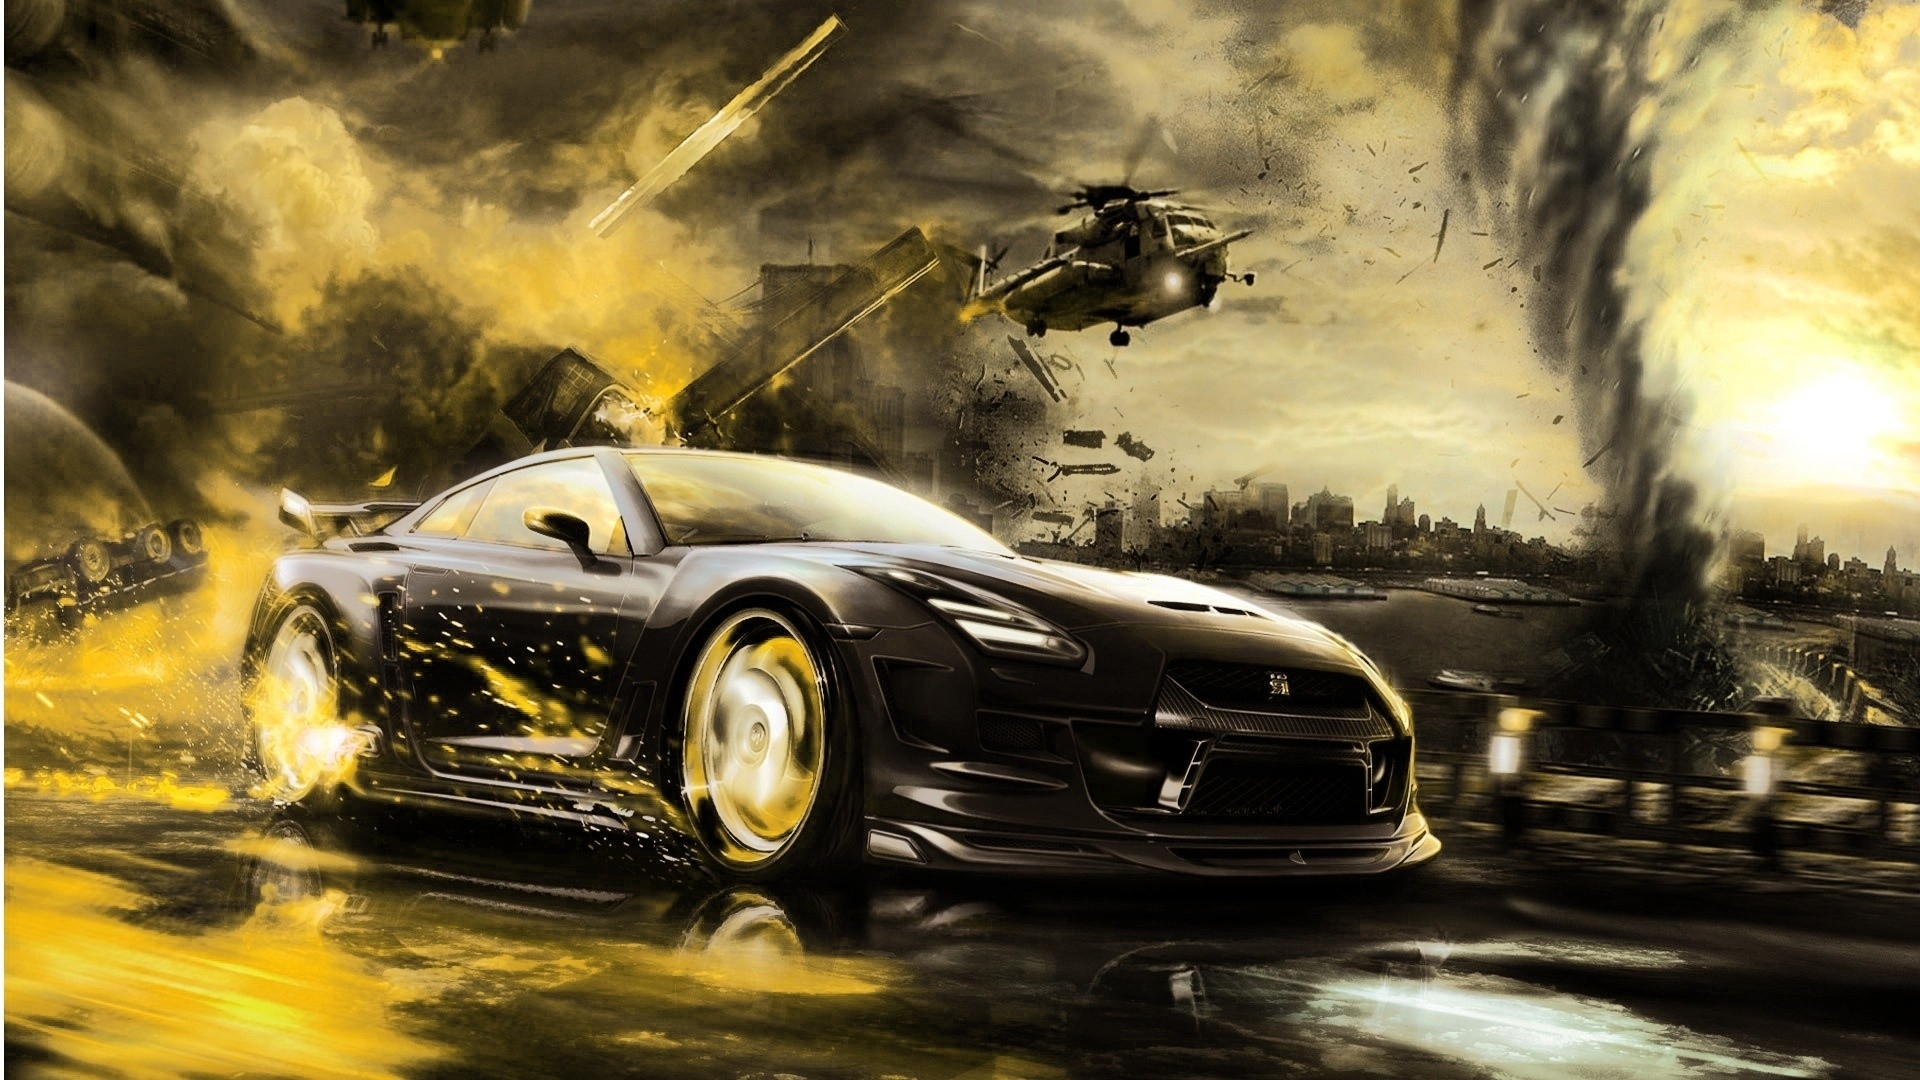 cool car wallpapers hd 1080p (72+ images)